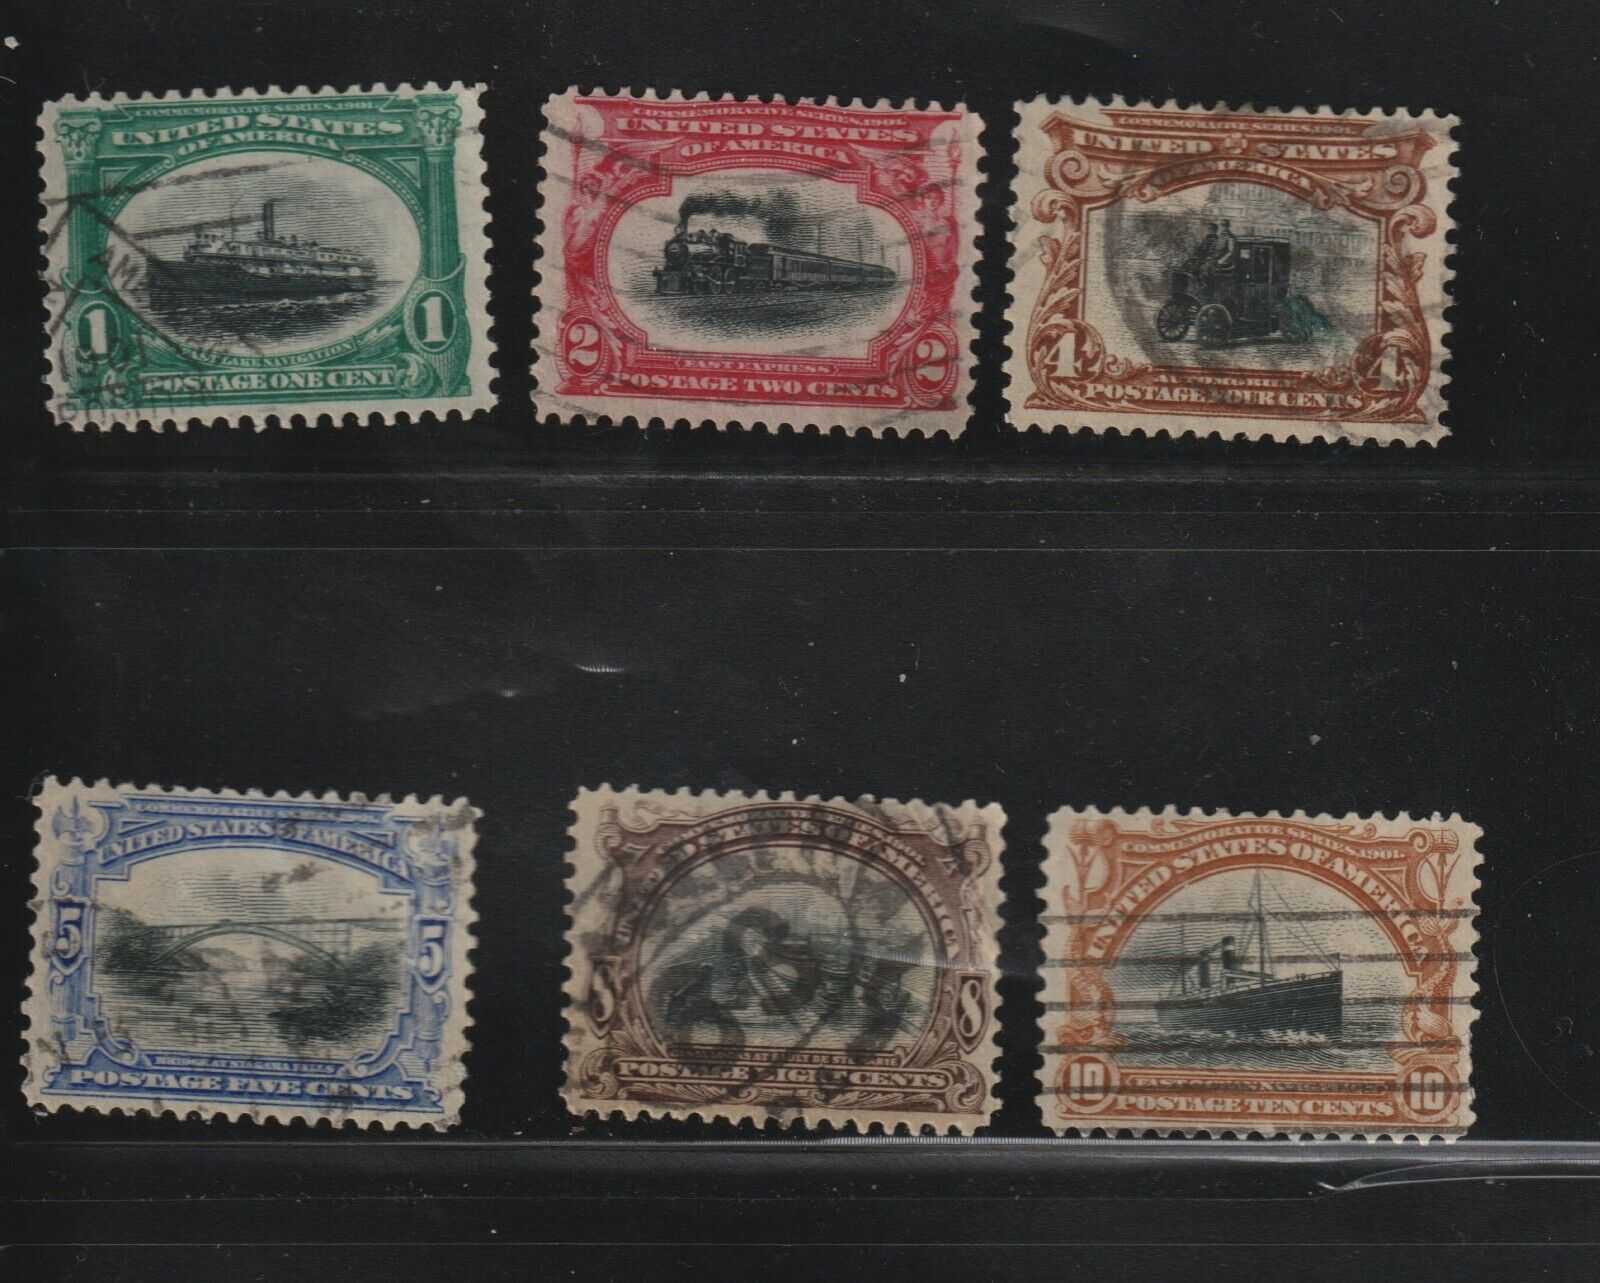 US Scott # 294-299 Pan-American Exposition  Complete set, Used. CV: $119.00